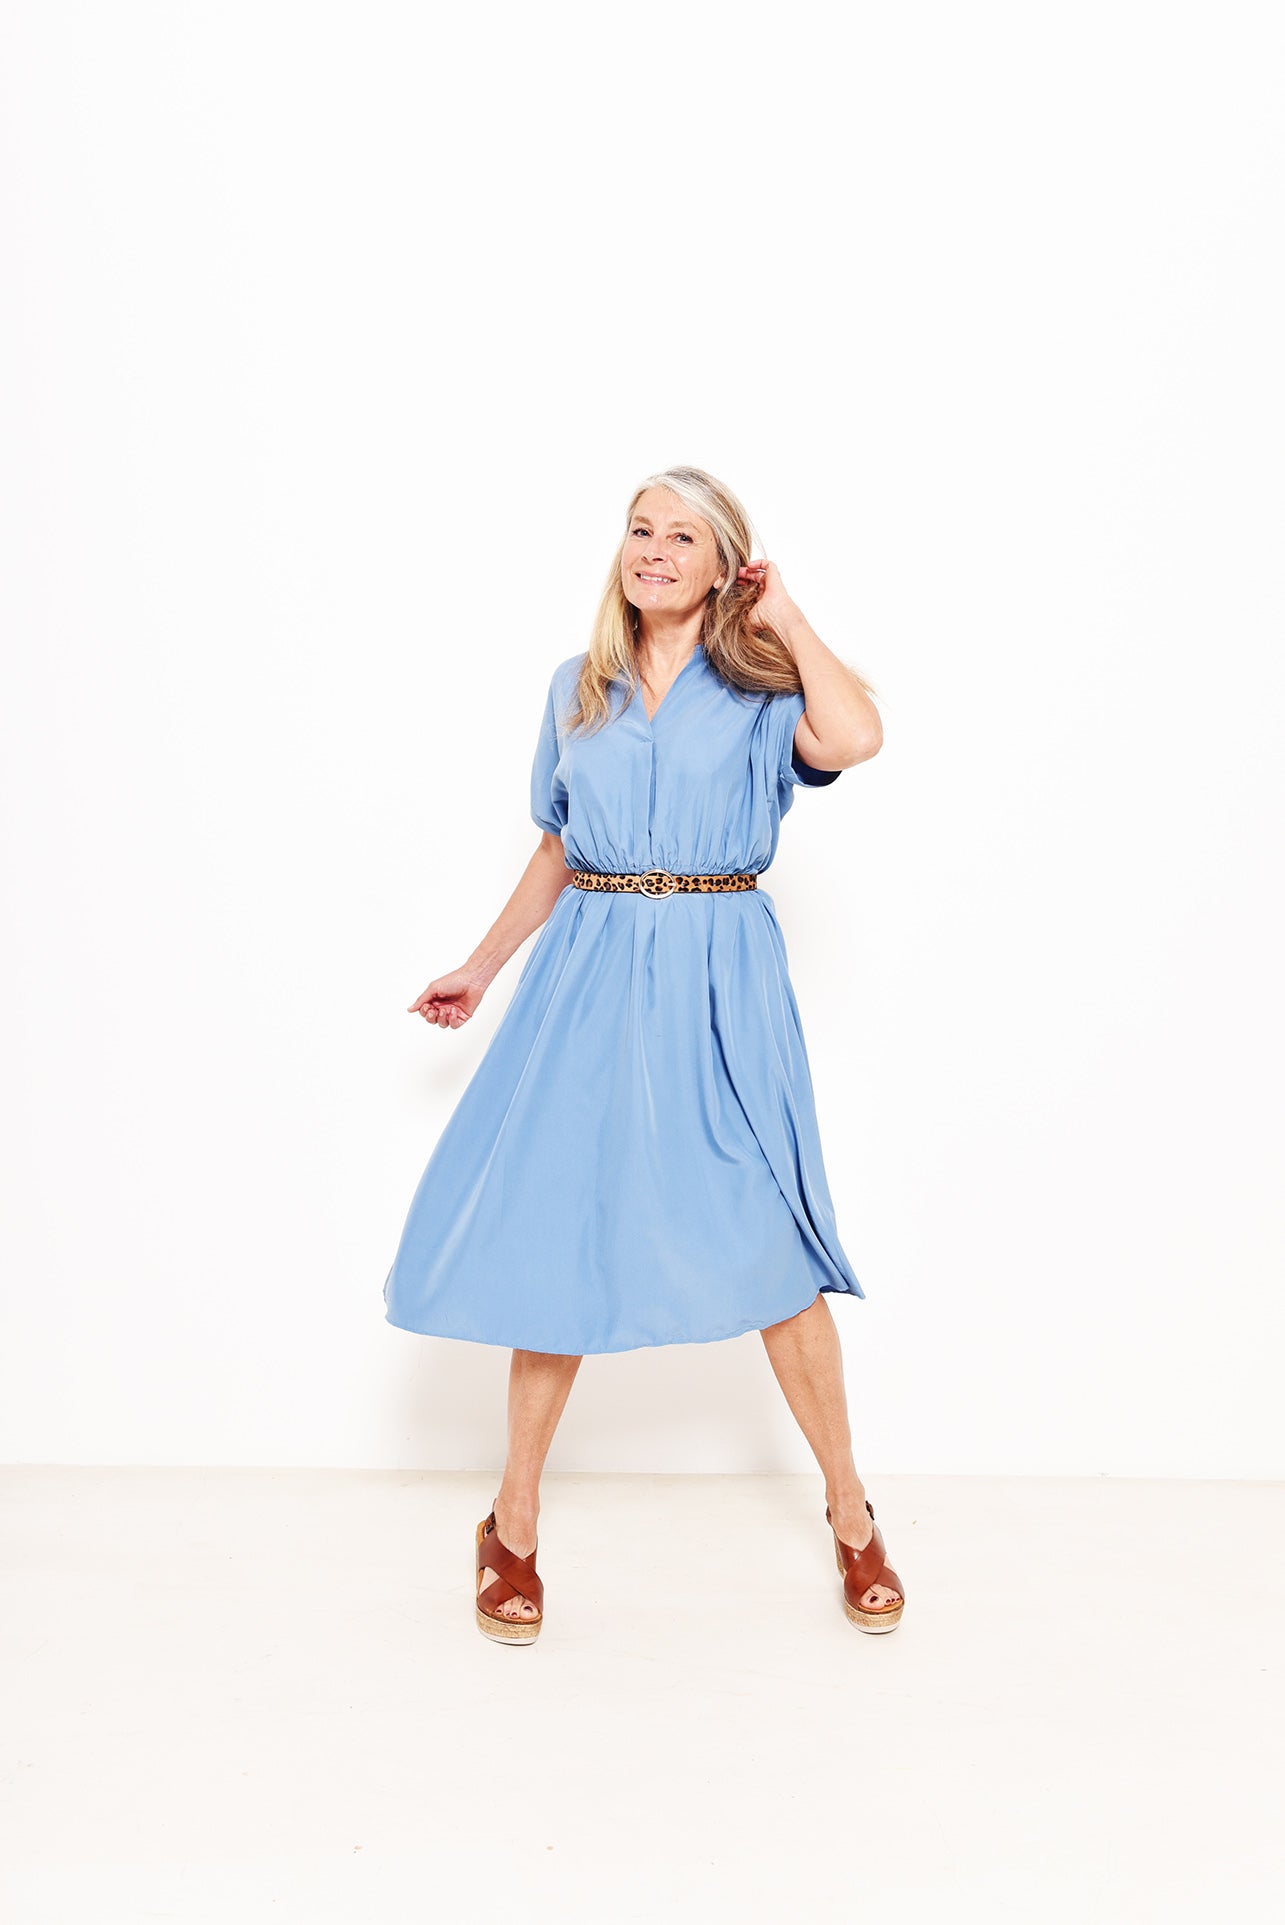 Women wearing the Taylor Dress sewing pattern from Fibre Mood on The Fold Line. A dress pattern made in cotton, viscose, linen, polyester blends or light wool fabrics, featuring shaped sleeves with sleeve trim, a slot neckline with a slight fold, A-line s